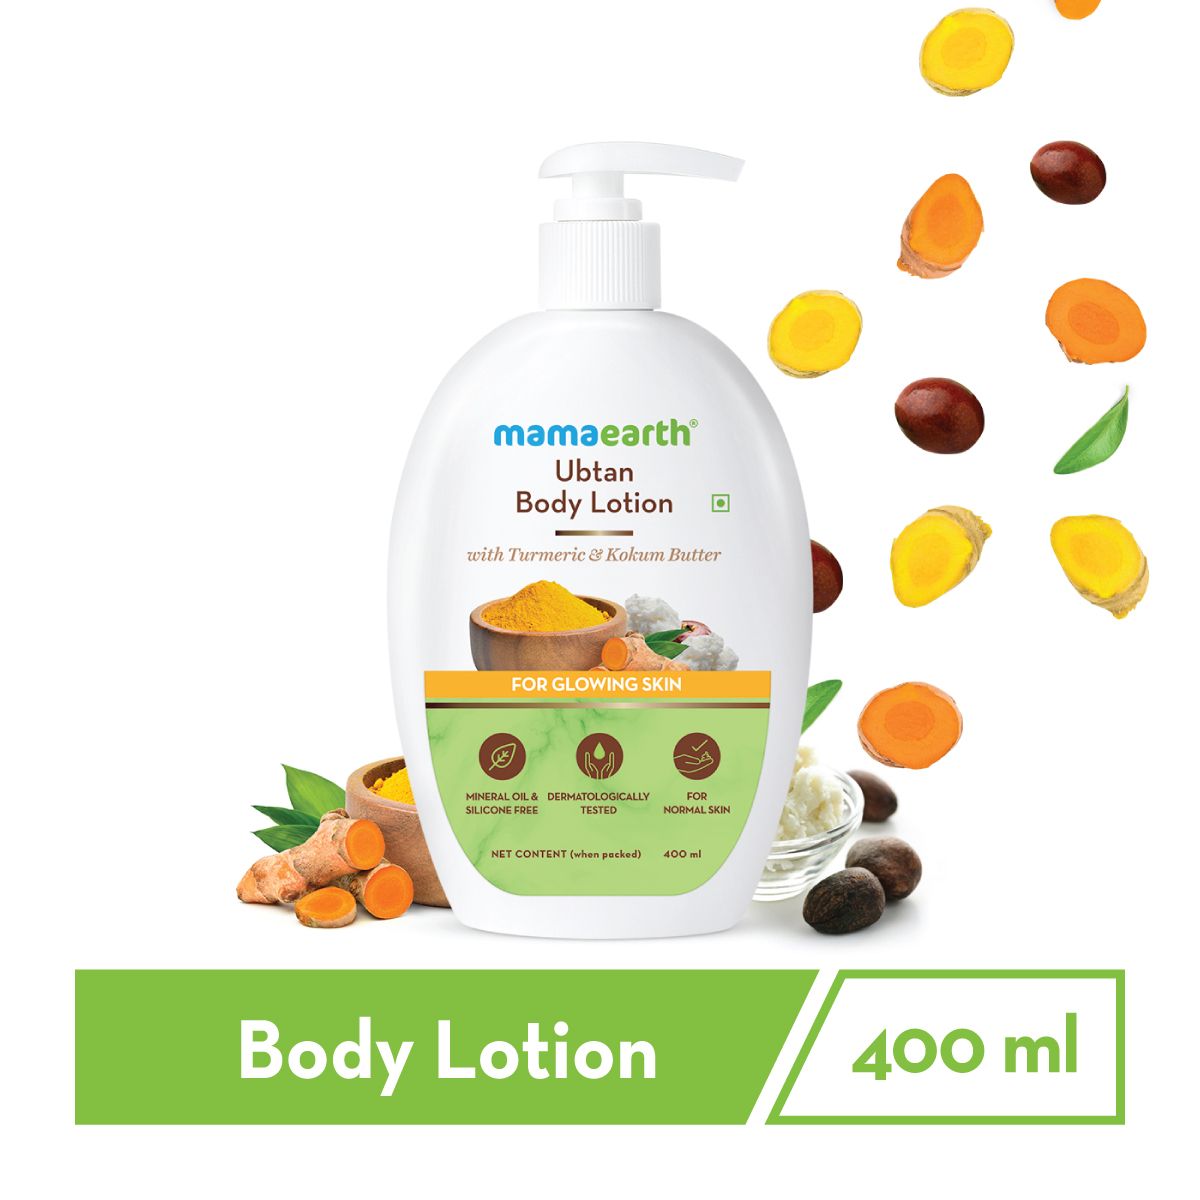 Mamaearth Ubtan Body Lotion Better Than Others Available In The Market